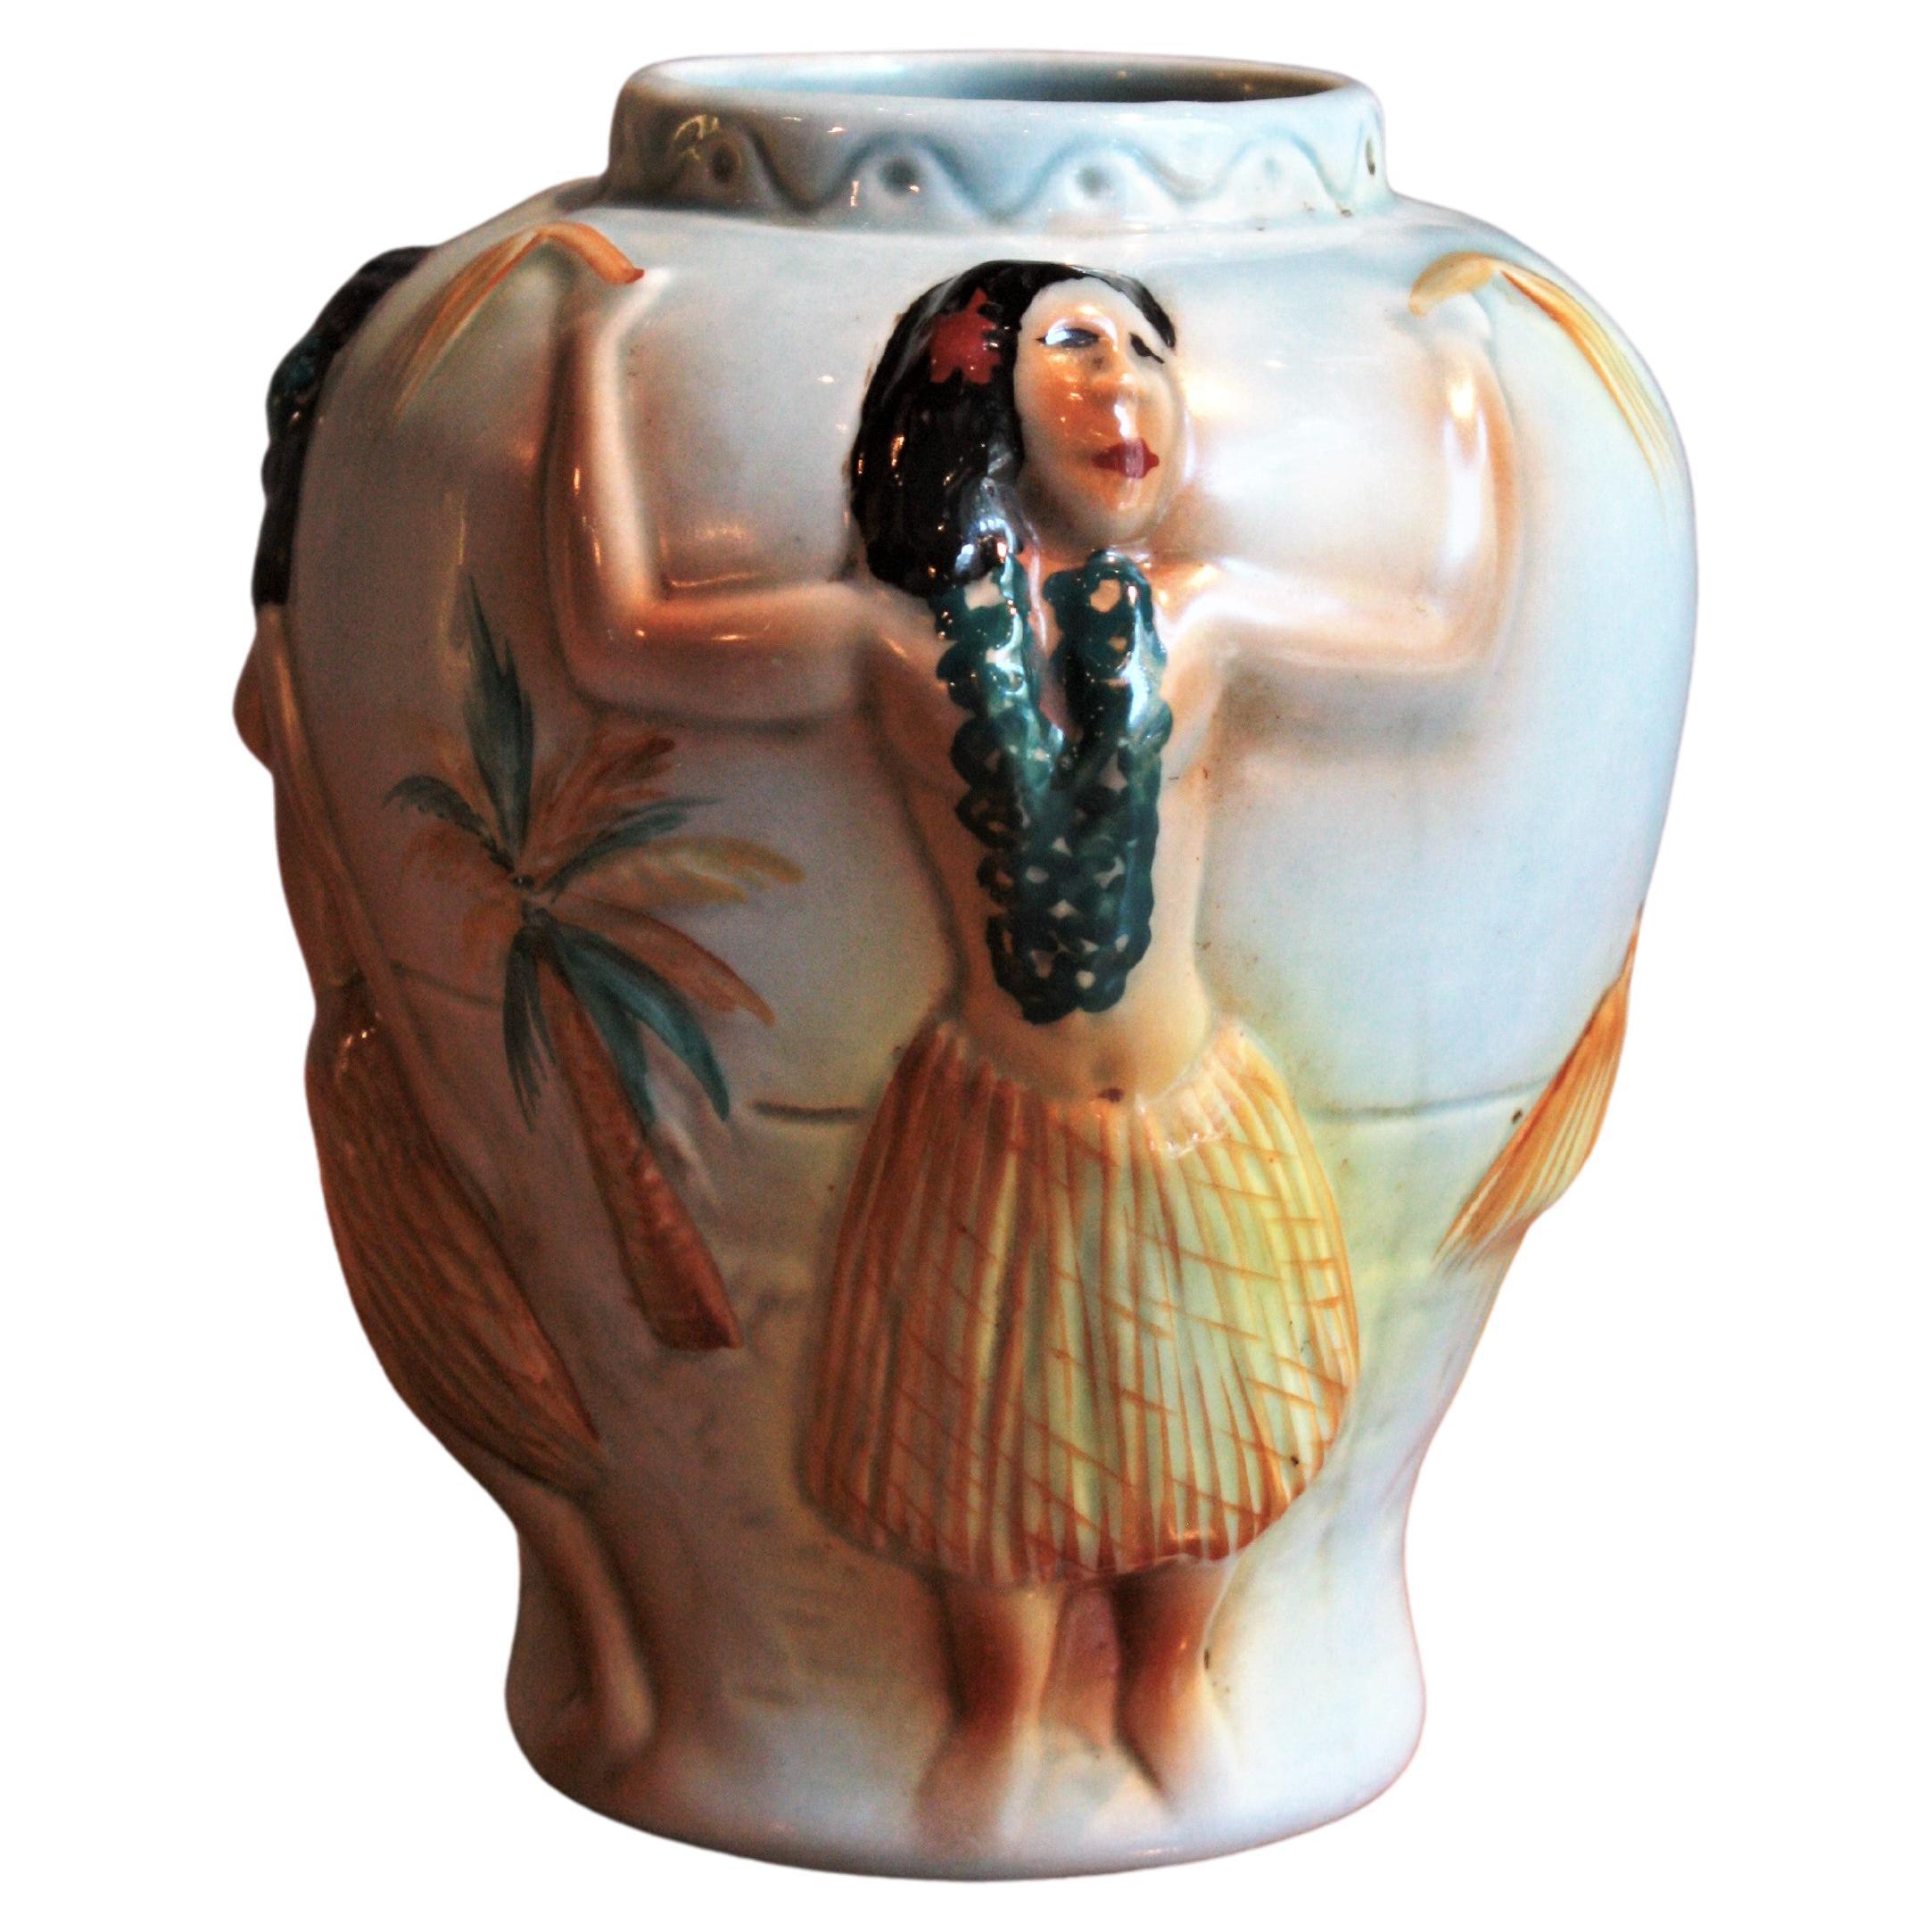 Midcentury Glazed Ceramic Vase with Hand-Painted Hula Dancers Motif For Sale